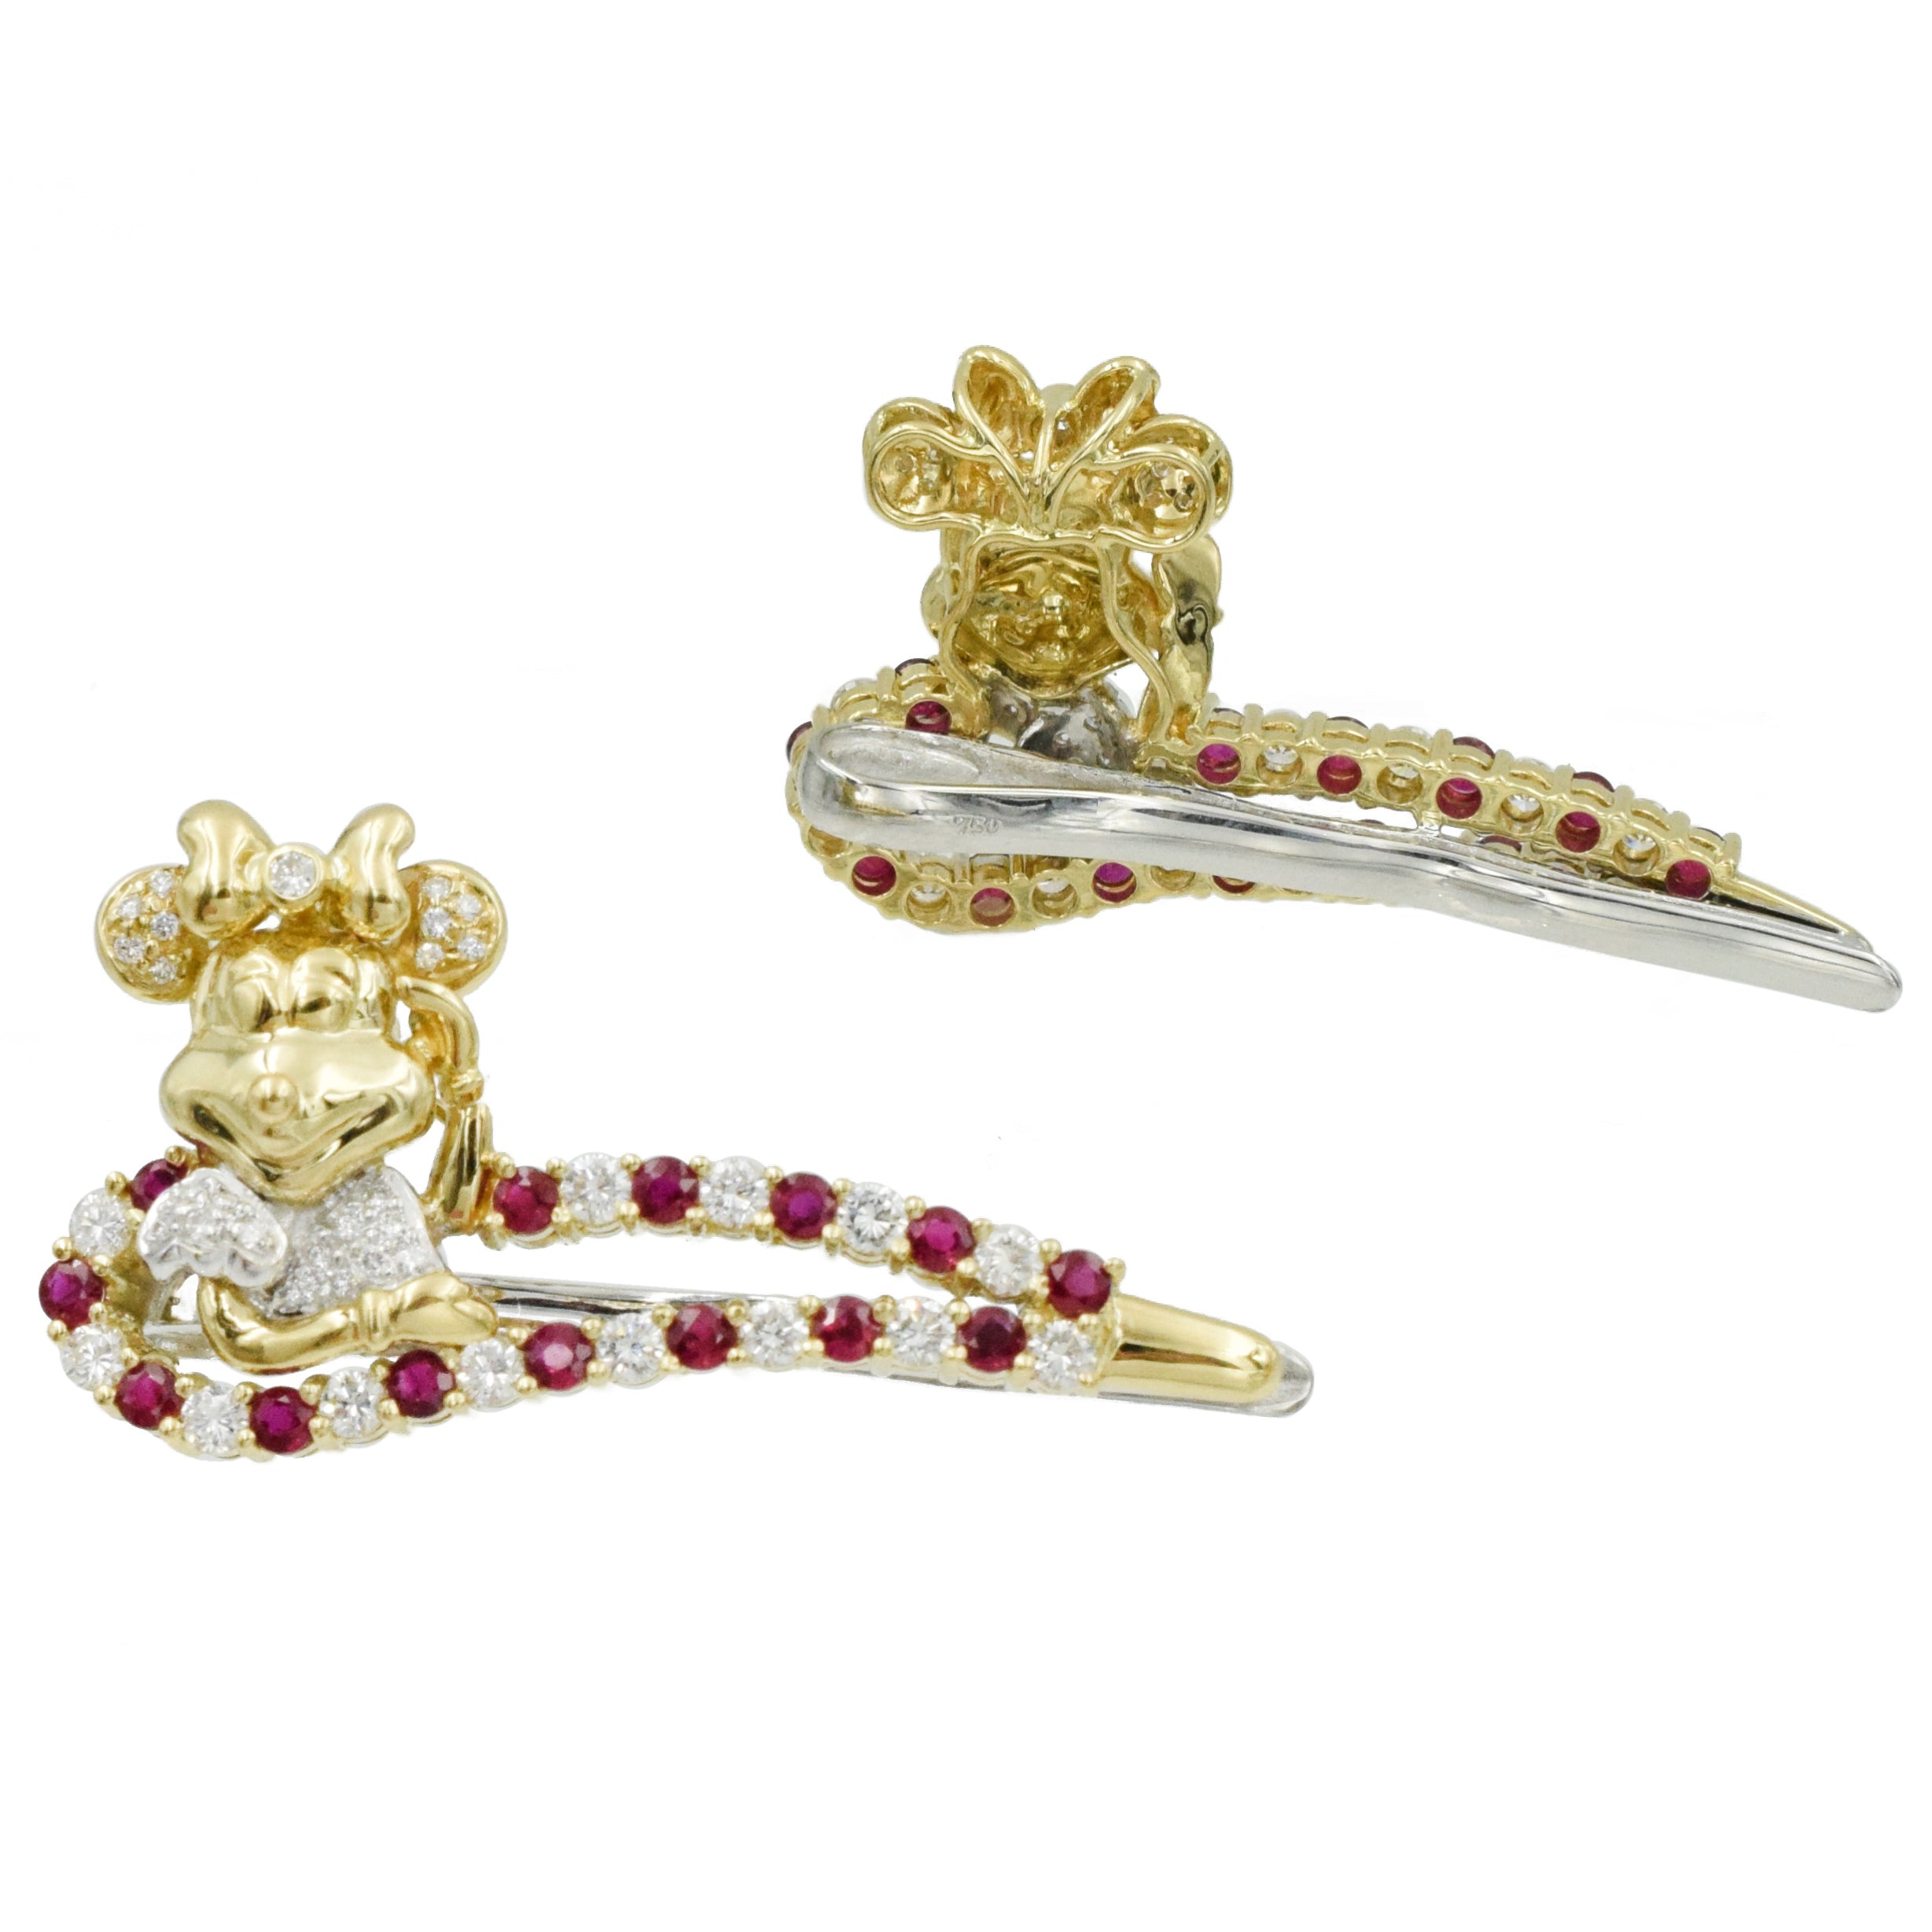 2.50ct Diamond & 2.50ct Ruby Minnie Mouse Hair Pins Clips in 18k Yellow Gold